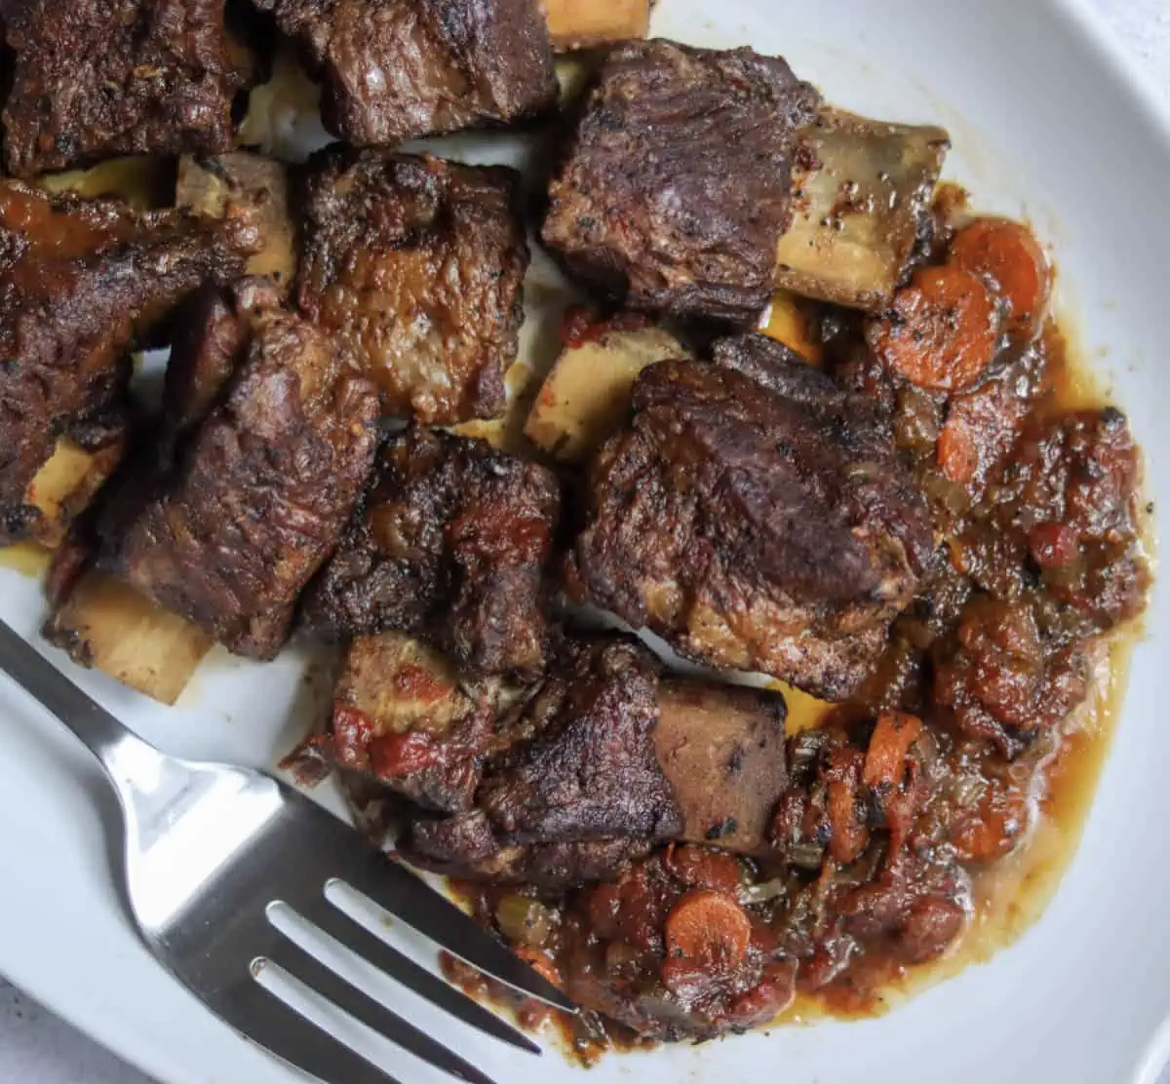 This photo shows beer braised short ribs on a white plate with a fork.